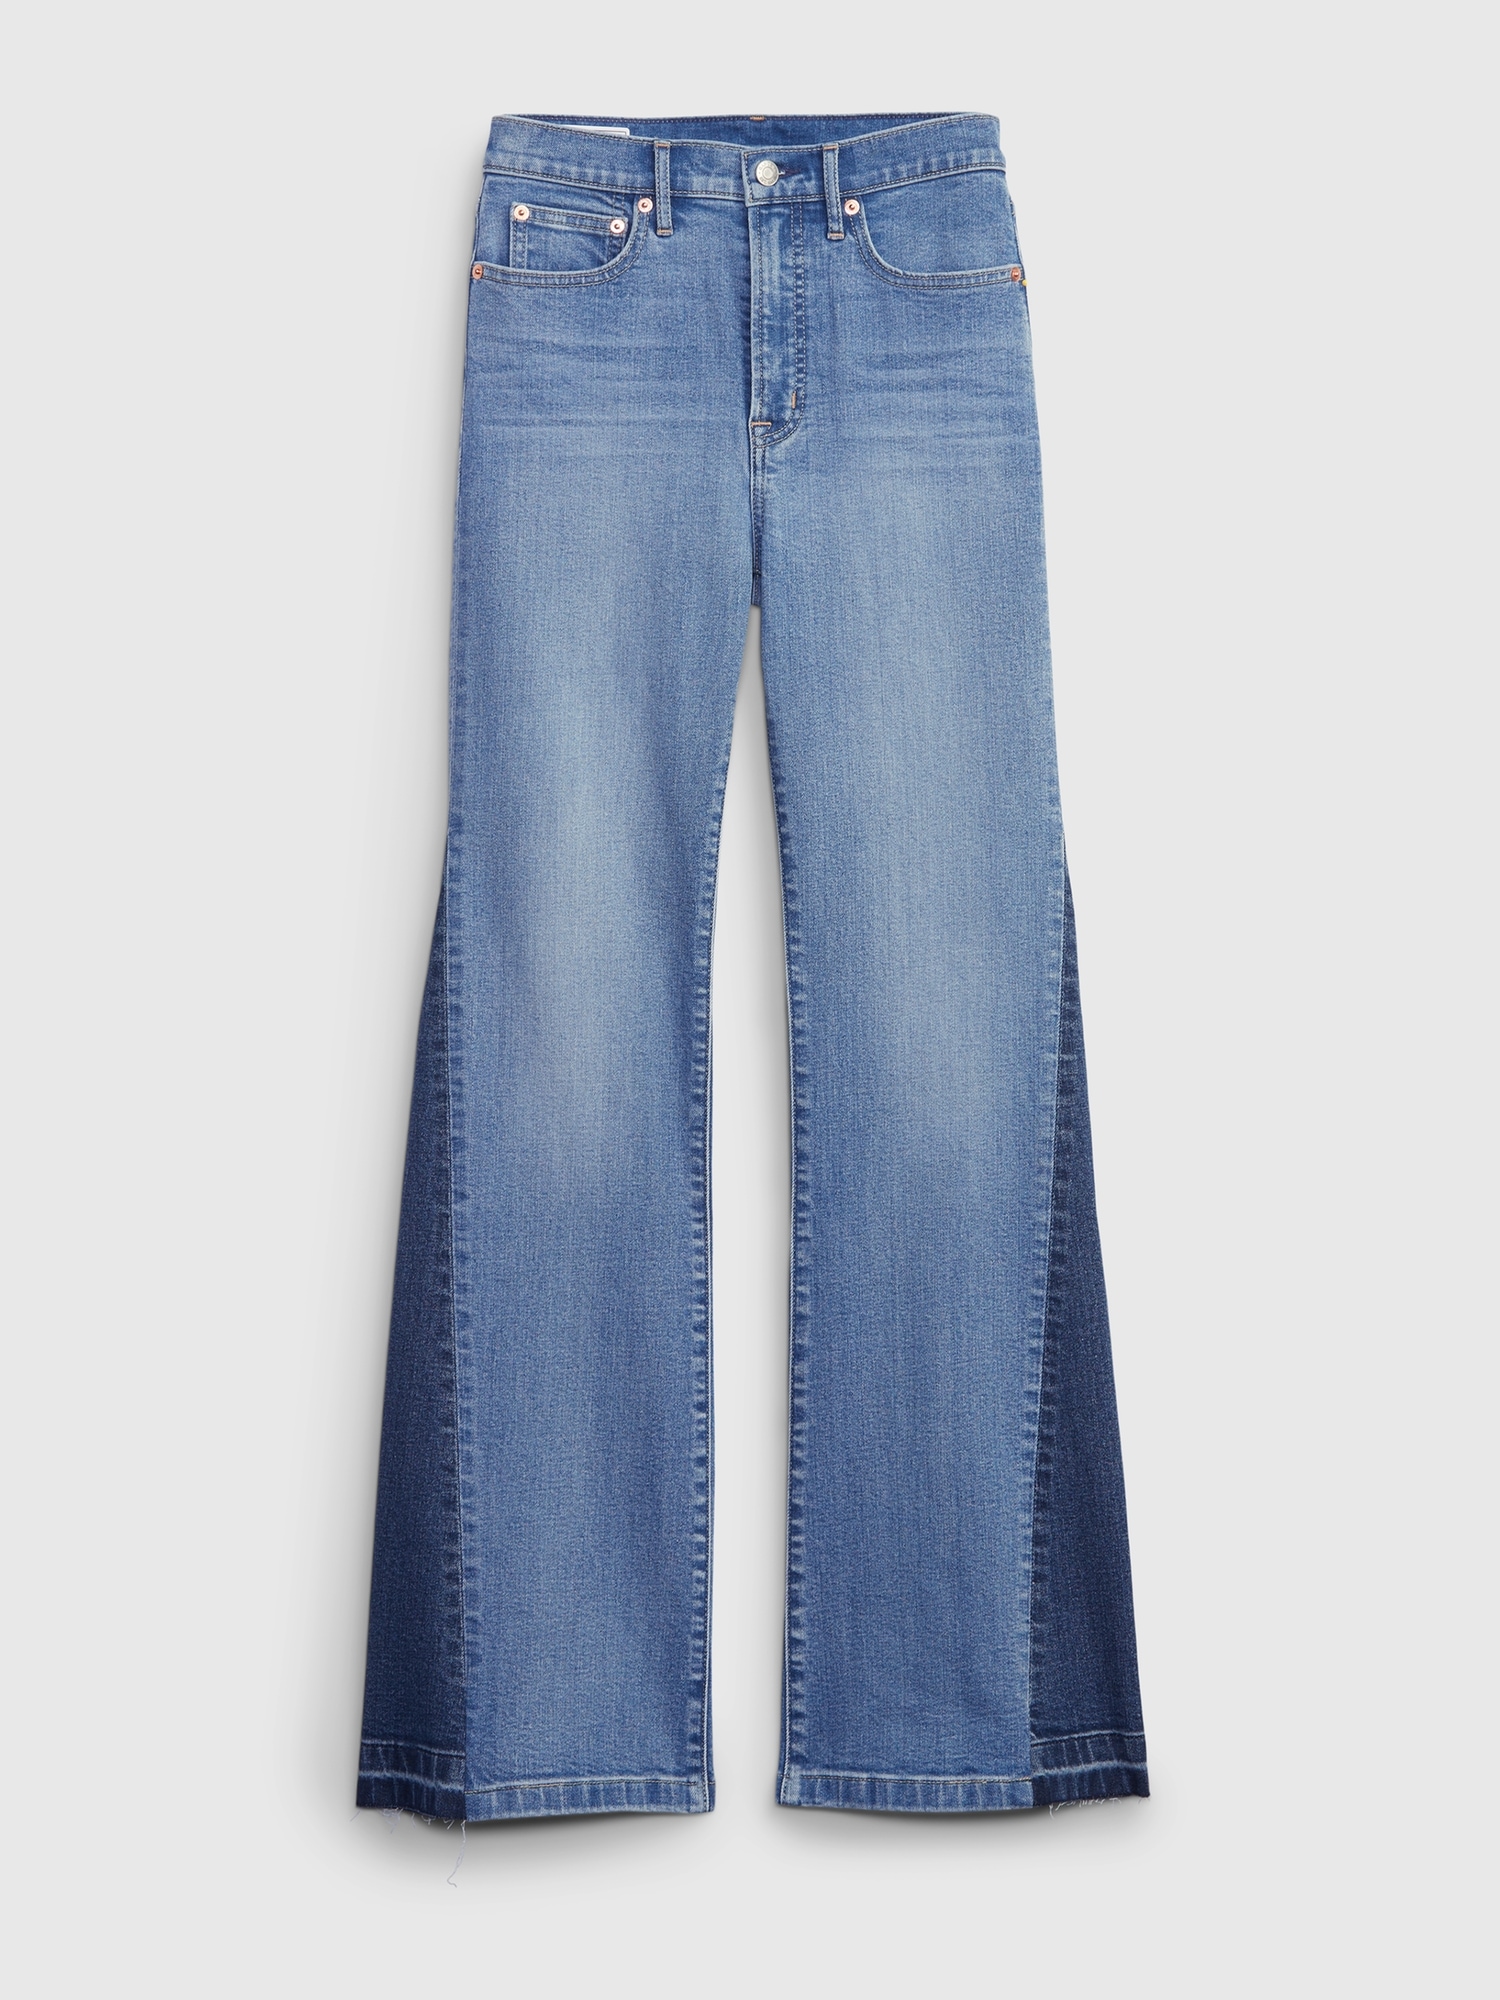 High Rise Patched '70s Flare Jeans with Washwell | Gap